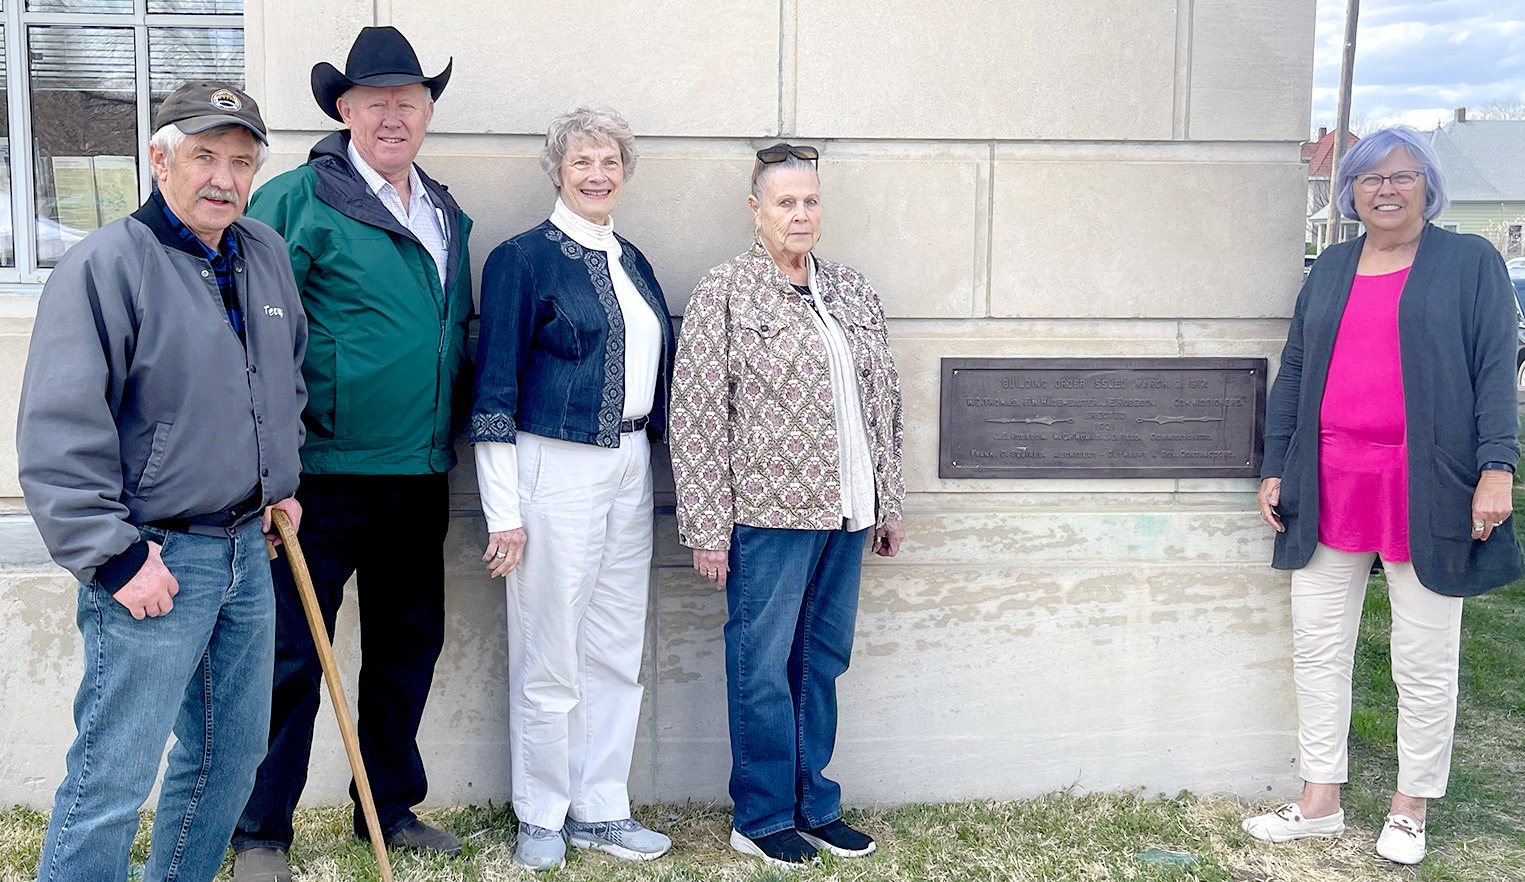 THE GRANDCHILDREN OF J. D. REED, who served as one of the Rooks County Commissioners in 1921 when construction of the courthouse began, traveled from around the United States to be present at the Centennial Celebration of the building on Thursday, April 20th. Pictured are (from left): Terry Reed, Hillsboro, N.C., John D. Reed, Brooten, Minn., Kathleen Brandt, Sitka, Ak., Lucy Clouse, Hutchinson, Minn., and Roberta Reed Johnson, High Point, N.C. (Les Cunningham of Stockton is a great-grandson of J. D. Reed.)